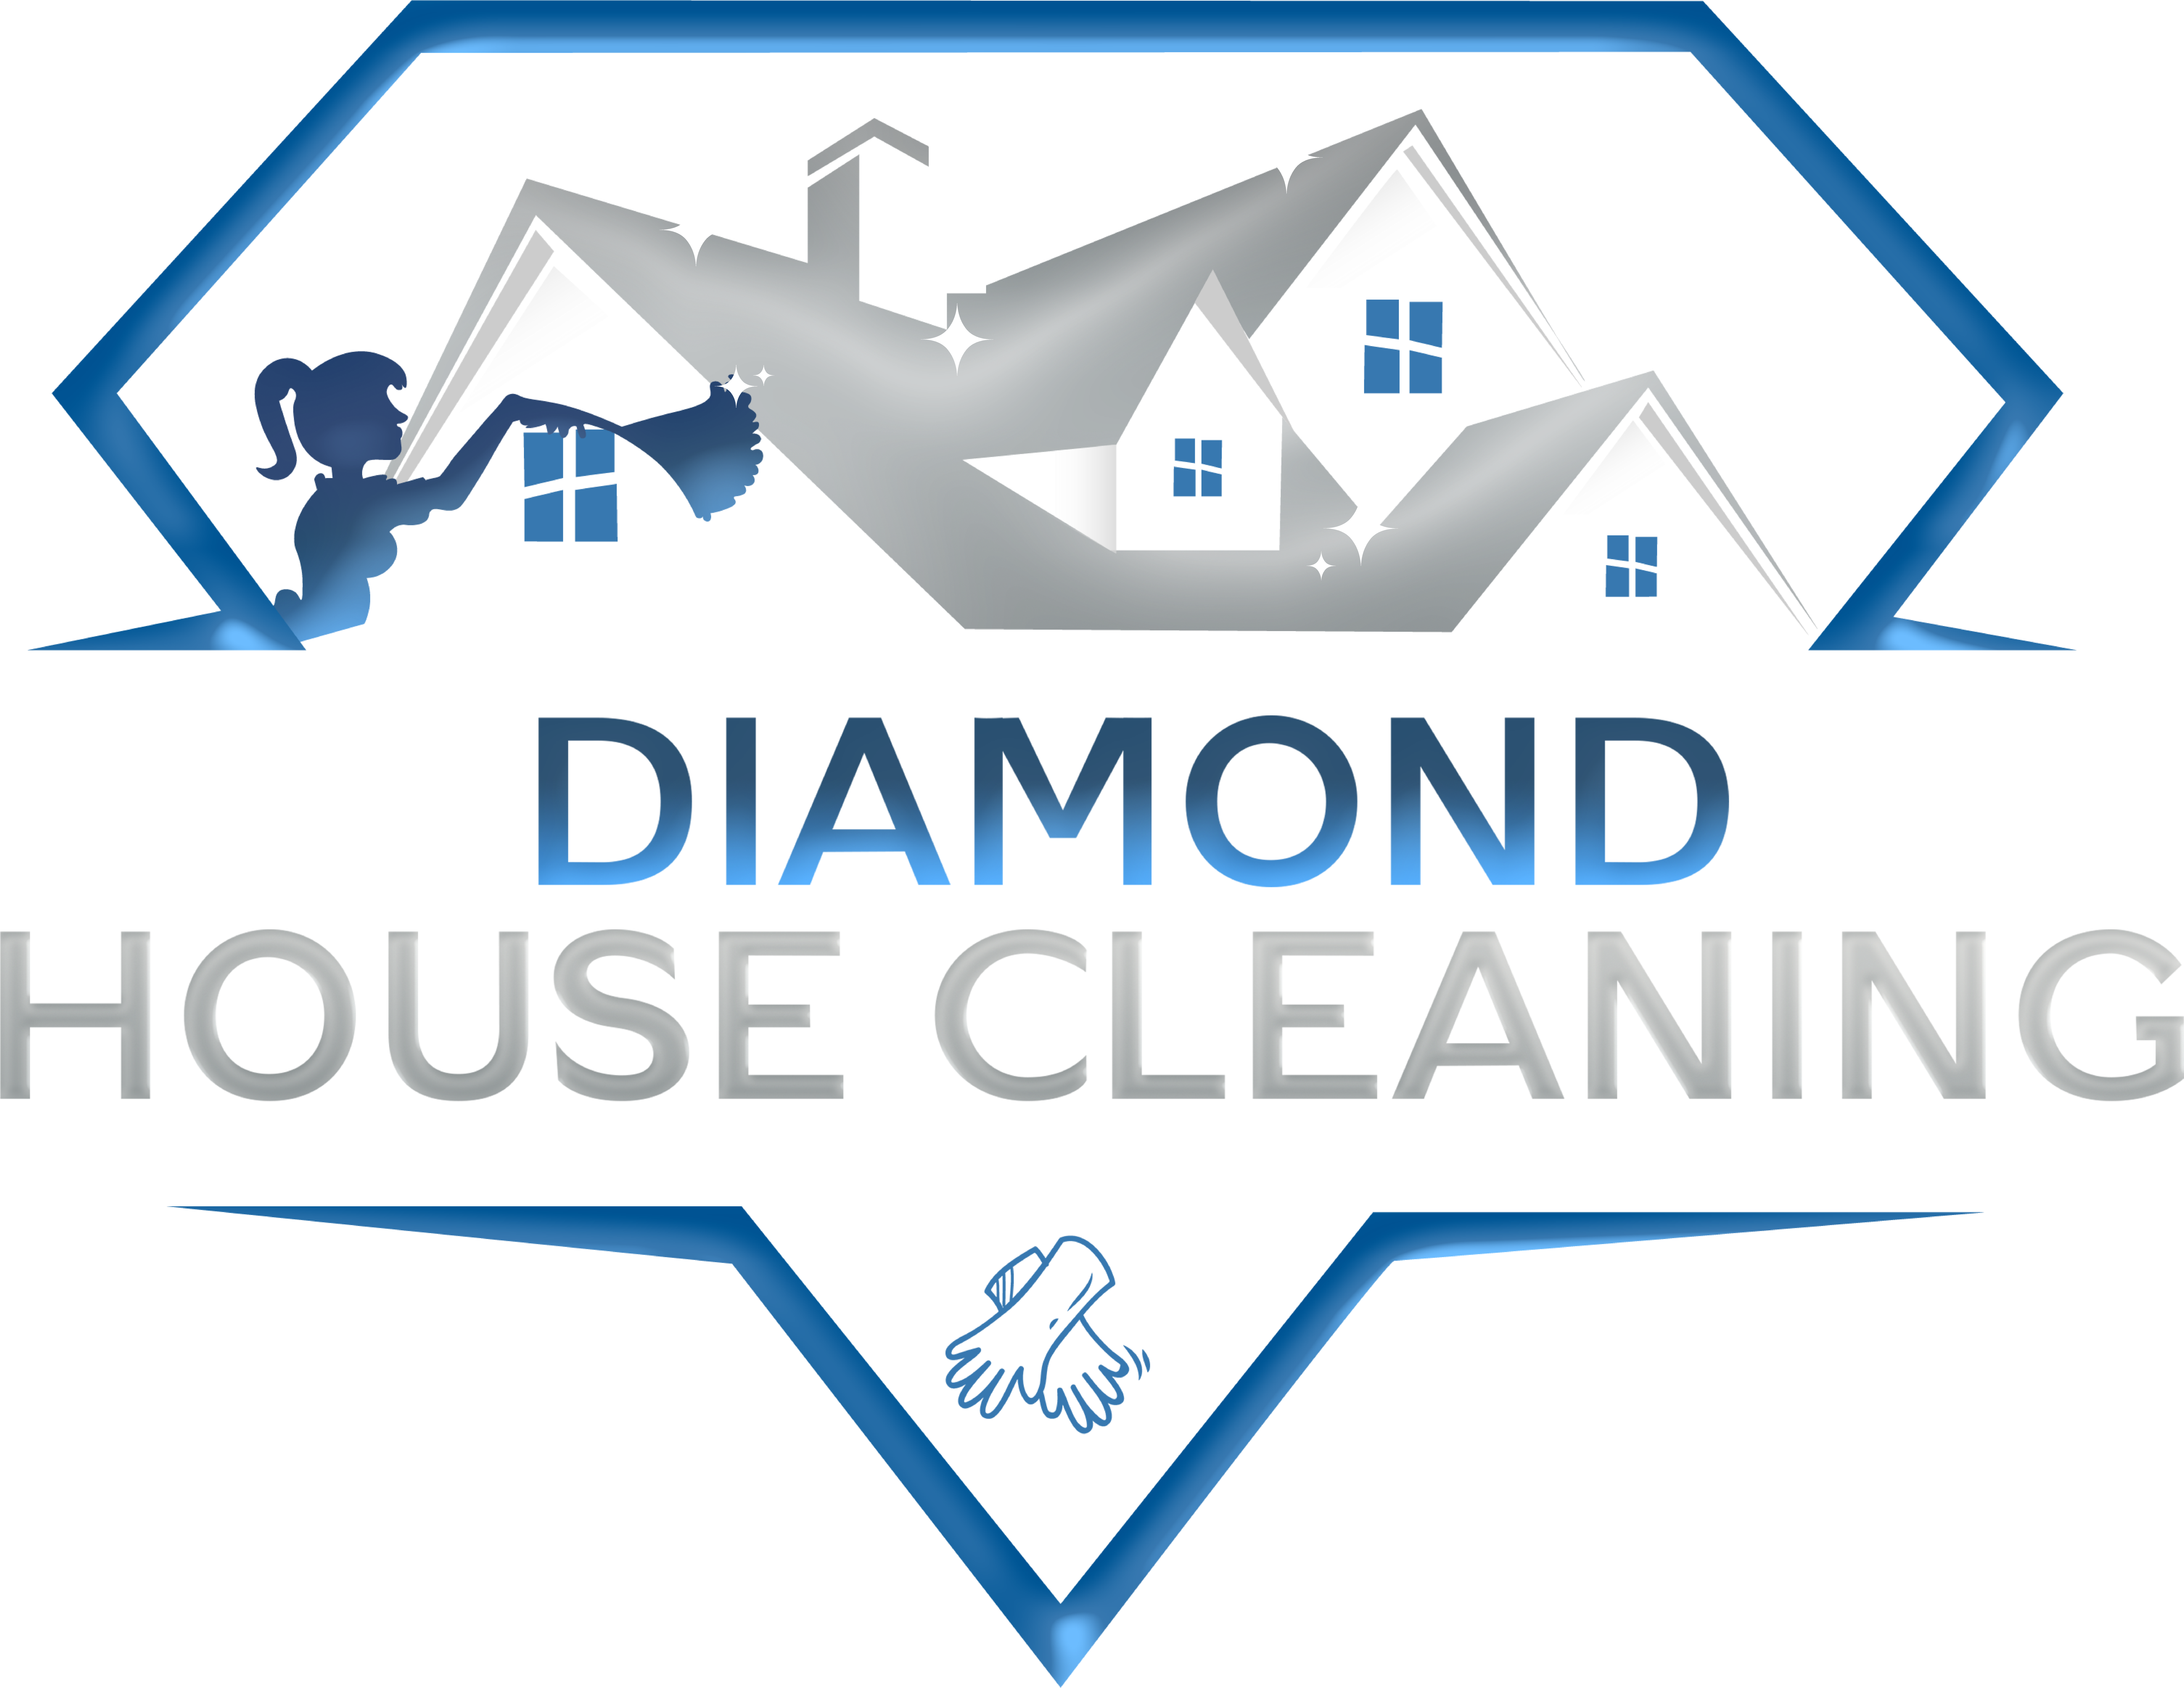 Diamond House Cleaning - Cleaning services in Ammon, Idaho. Cleaning services in Rigby, Idaho. Cleaning services in Idaho Falls, Idaho. Cleaning services in Rexburg, Idaho. Cleaning services in Ucon, Idaho. Cleaning services in Blackfoot, Idaho - Residential Cleaning Ammon, Idaho. Deep Cleaning Ammon, Idaho. Residential Cleaning Move Out / In, Idaho. Commercial Cleaning Ammon, Idaho. Construction Cleaning Ammon, Idaho - Logo